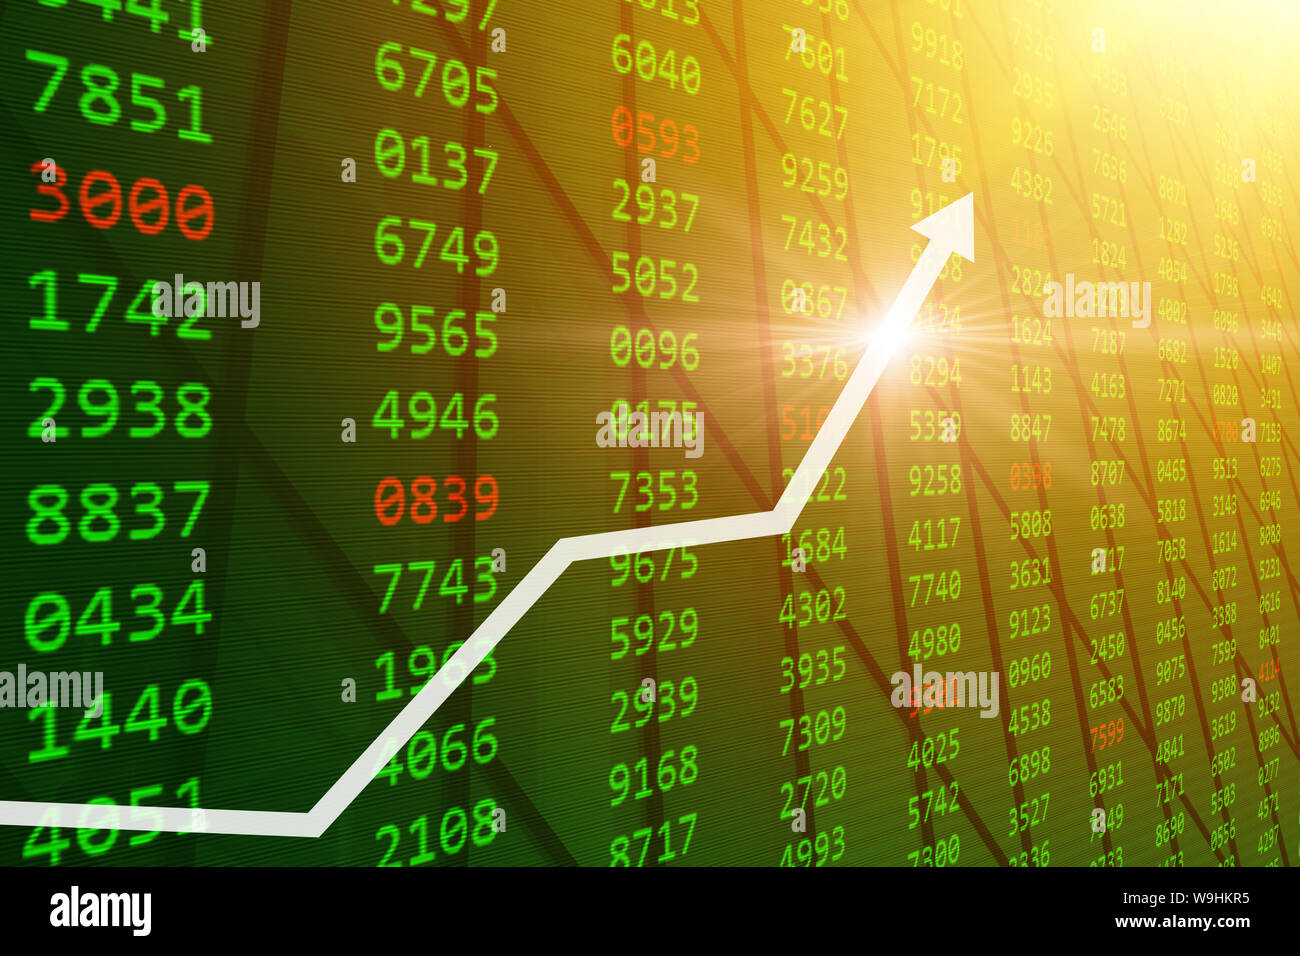 Bull Stock Market - Good stock buy prices up from Global economic and financial  grow Stock Photo